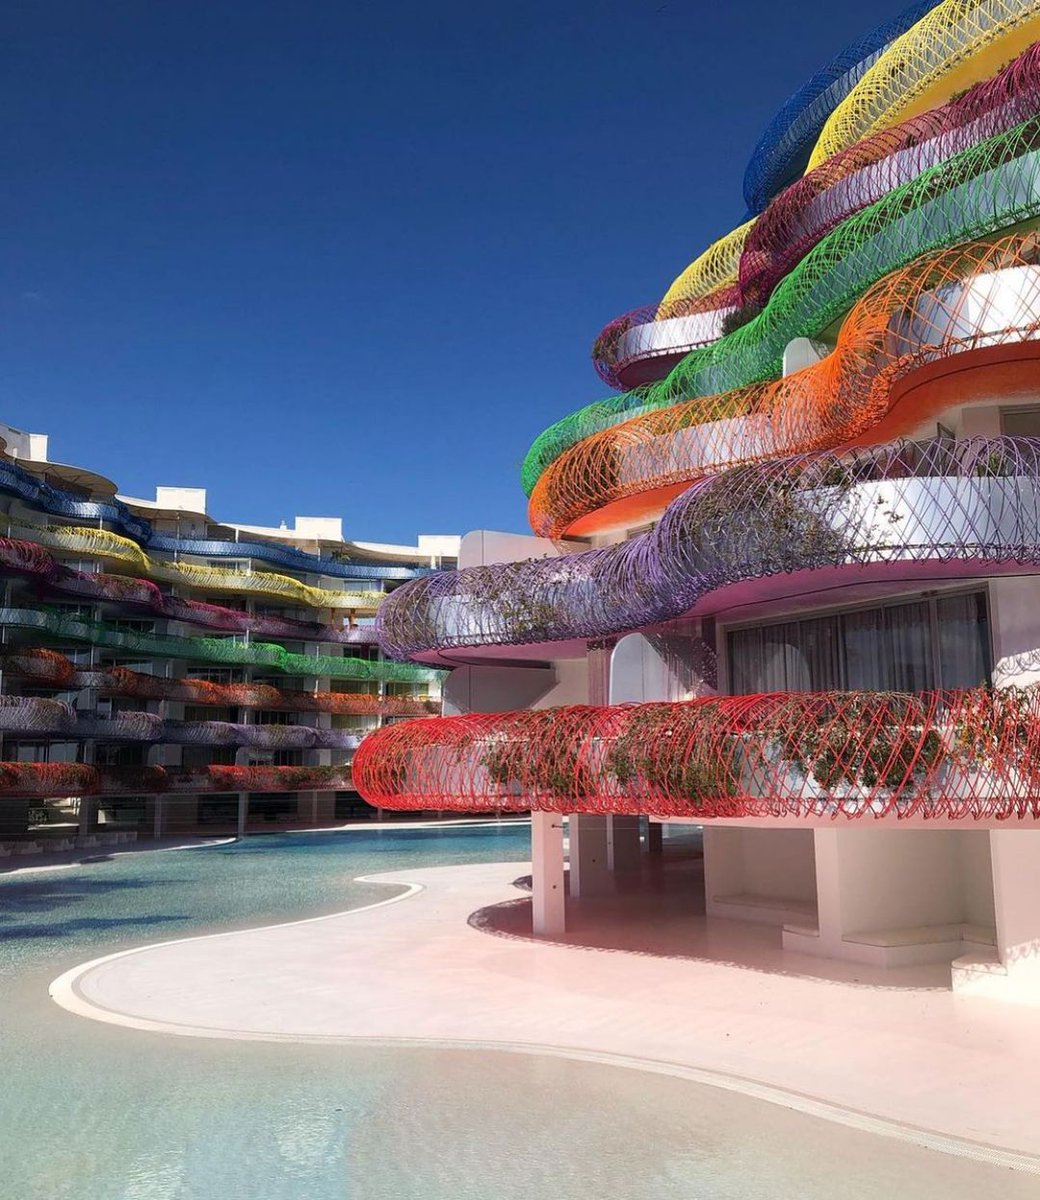 This is one of the most emblematic buildings on the Paseo Juan Carlos I and its architect, Jean Nouvel, was inspired by the curved shapes of nature, incorporating the beauty of the Ibizan landscape through its interaction with the Mediterranean Sea. The result is astounding!😍